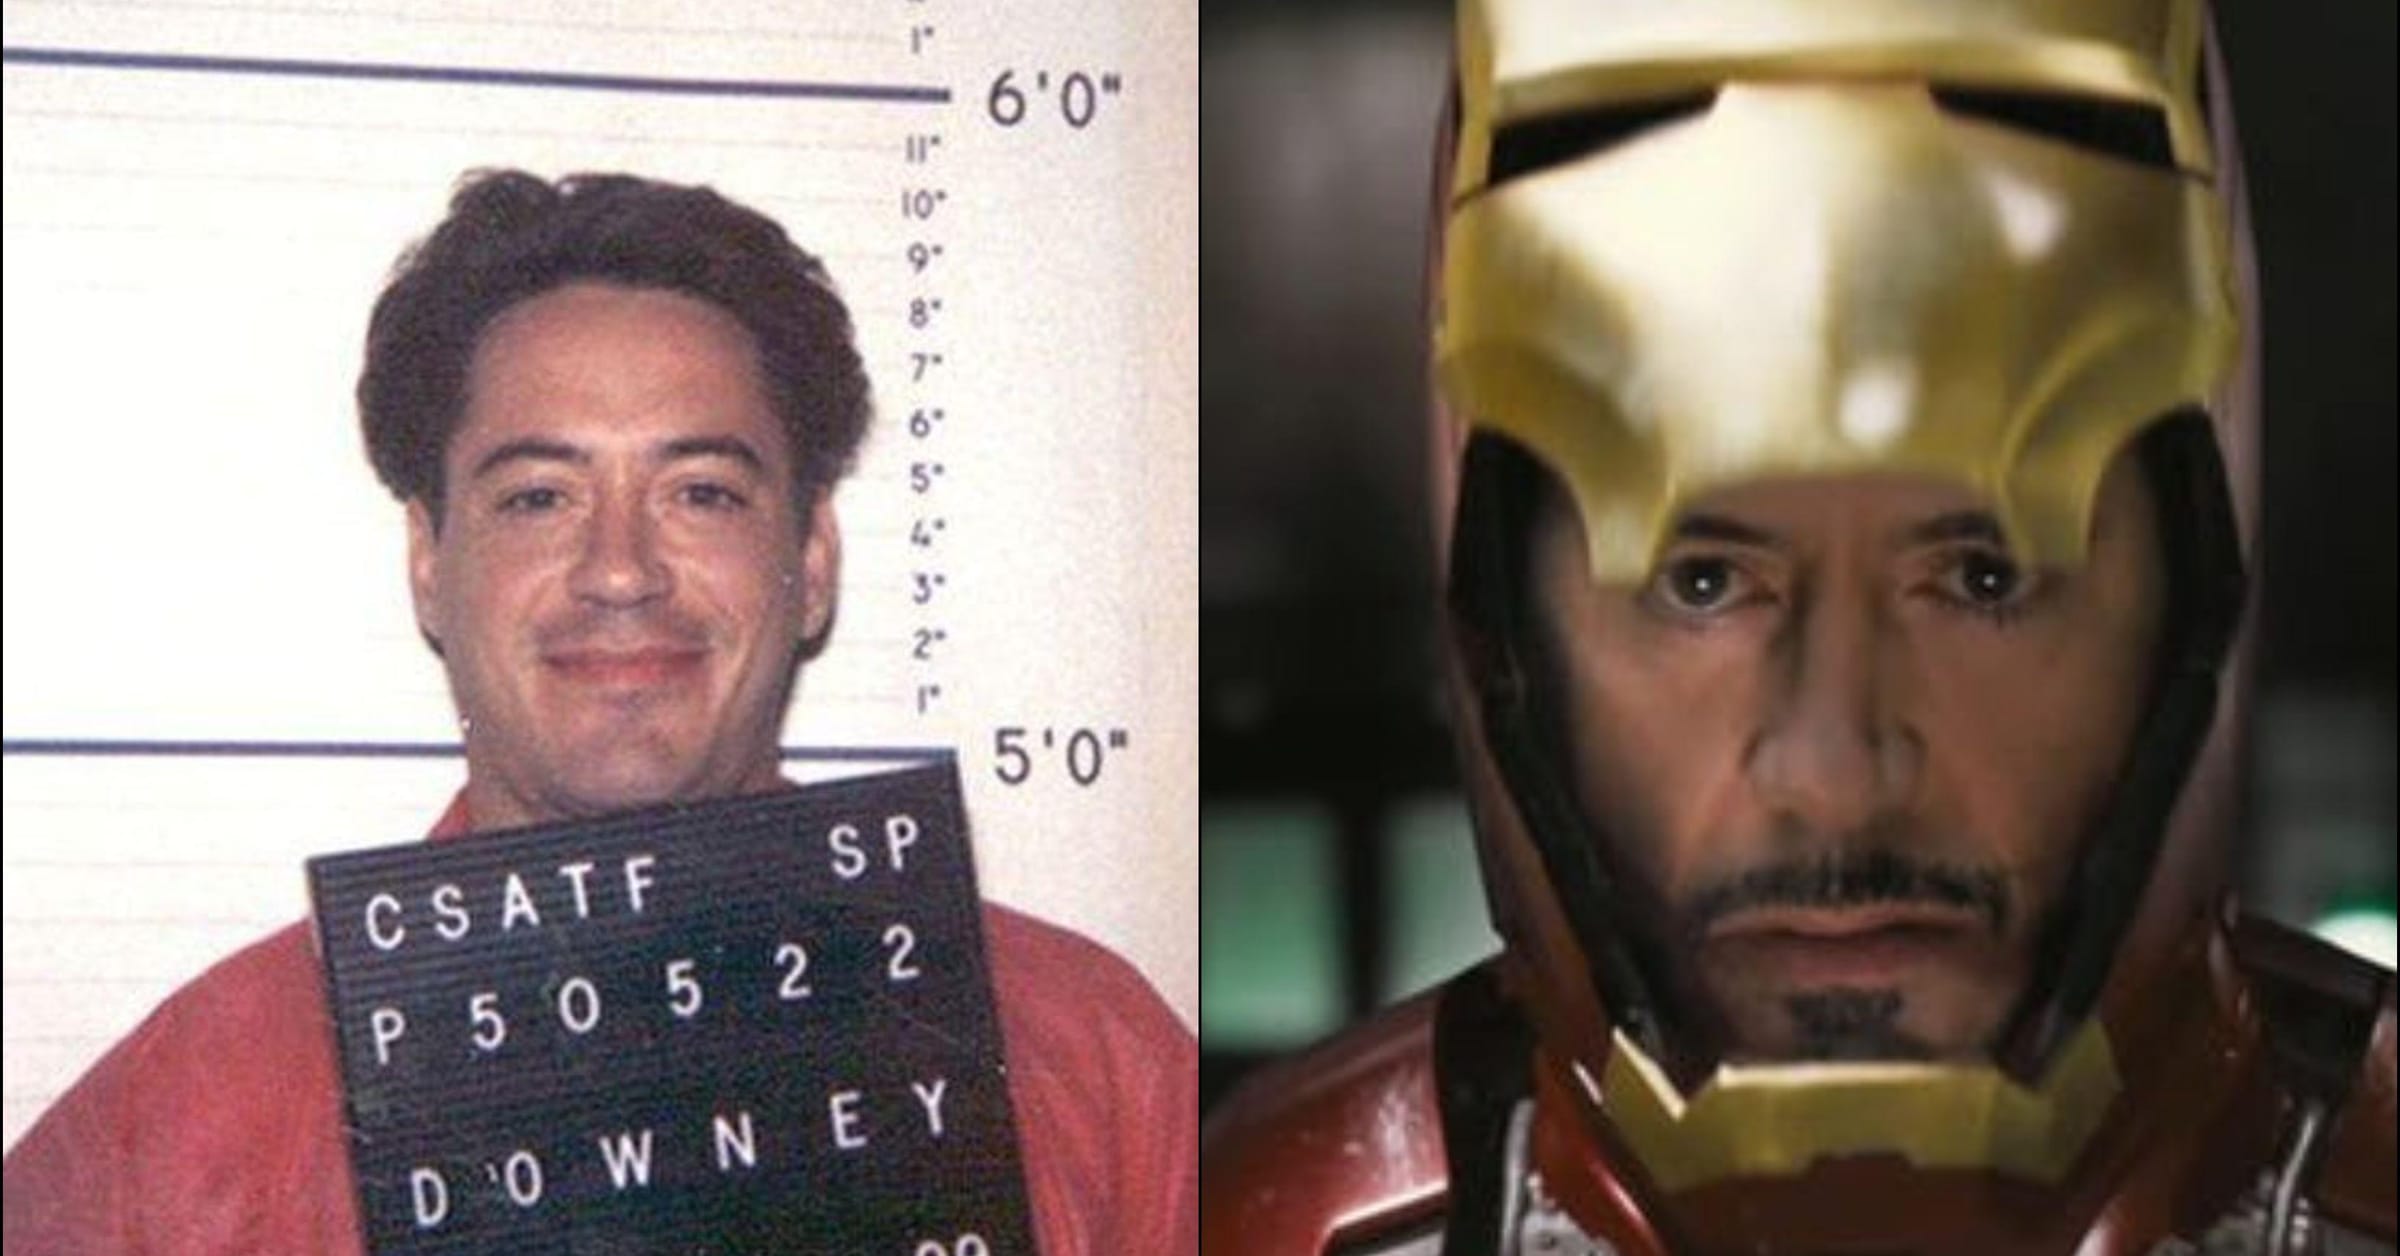 Robert Downey Jr. Almost Lost Iron Man Role to This 2000s Action Star